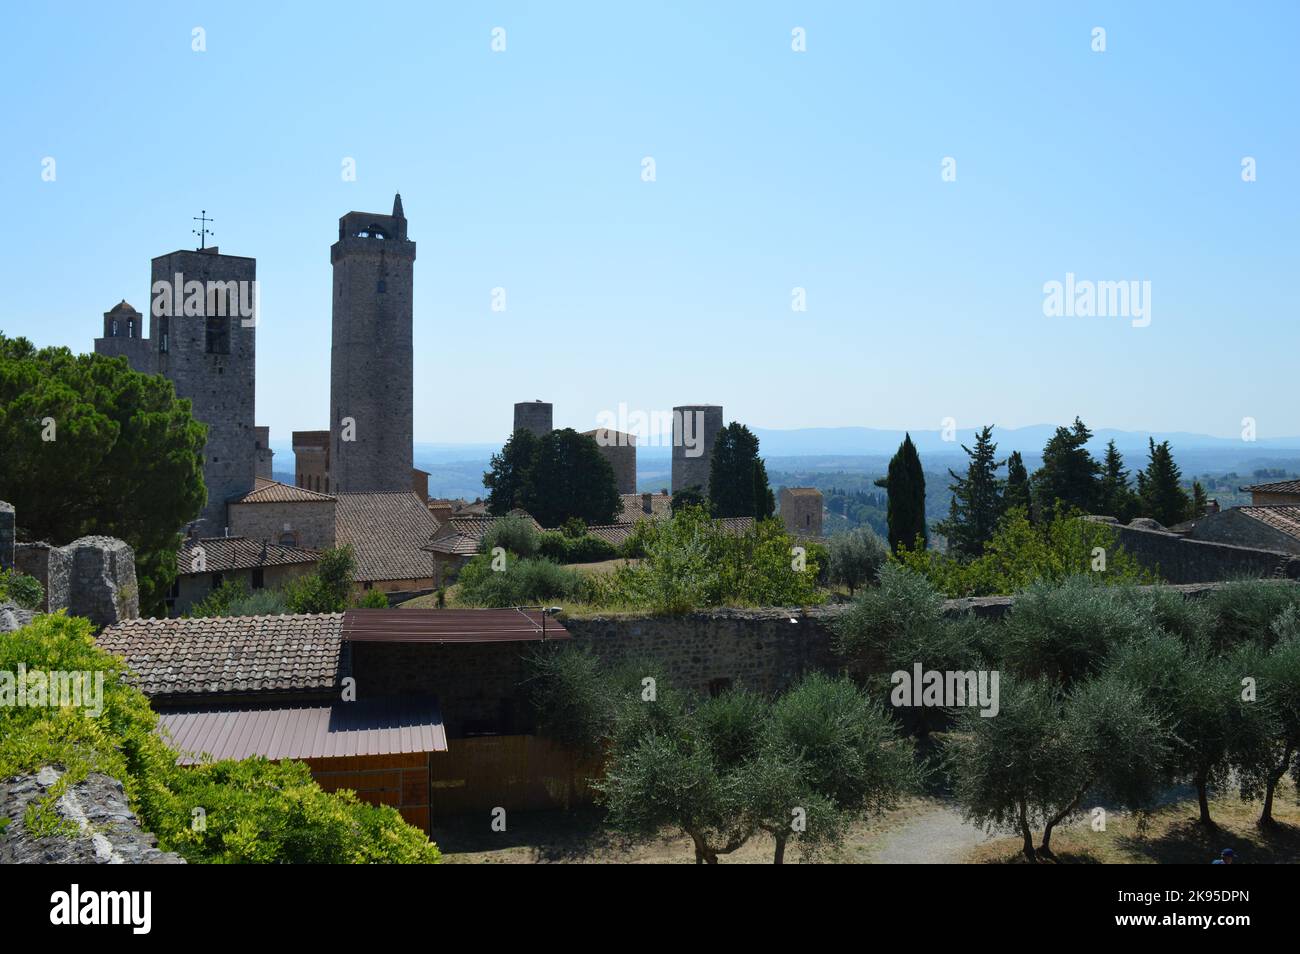 San Gimignano, view on tower houses and olive trees Stock Photo